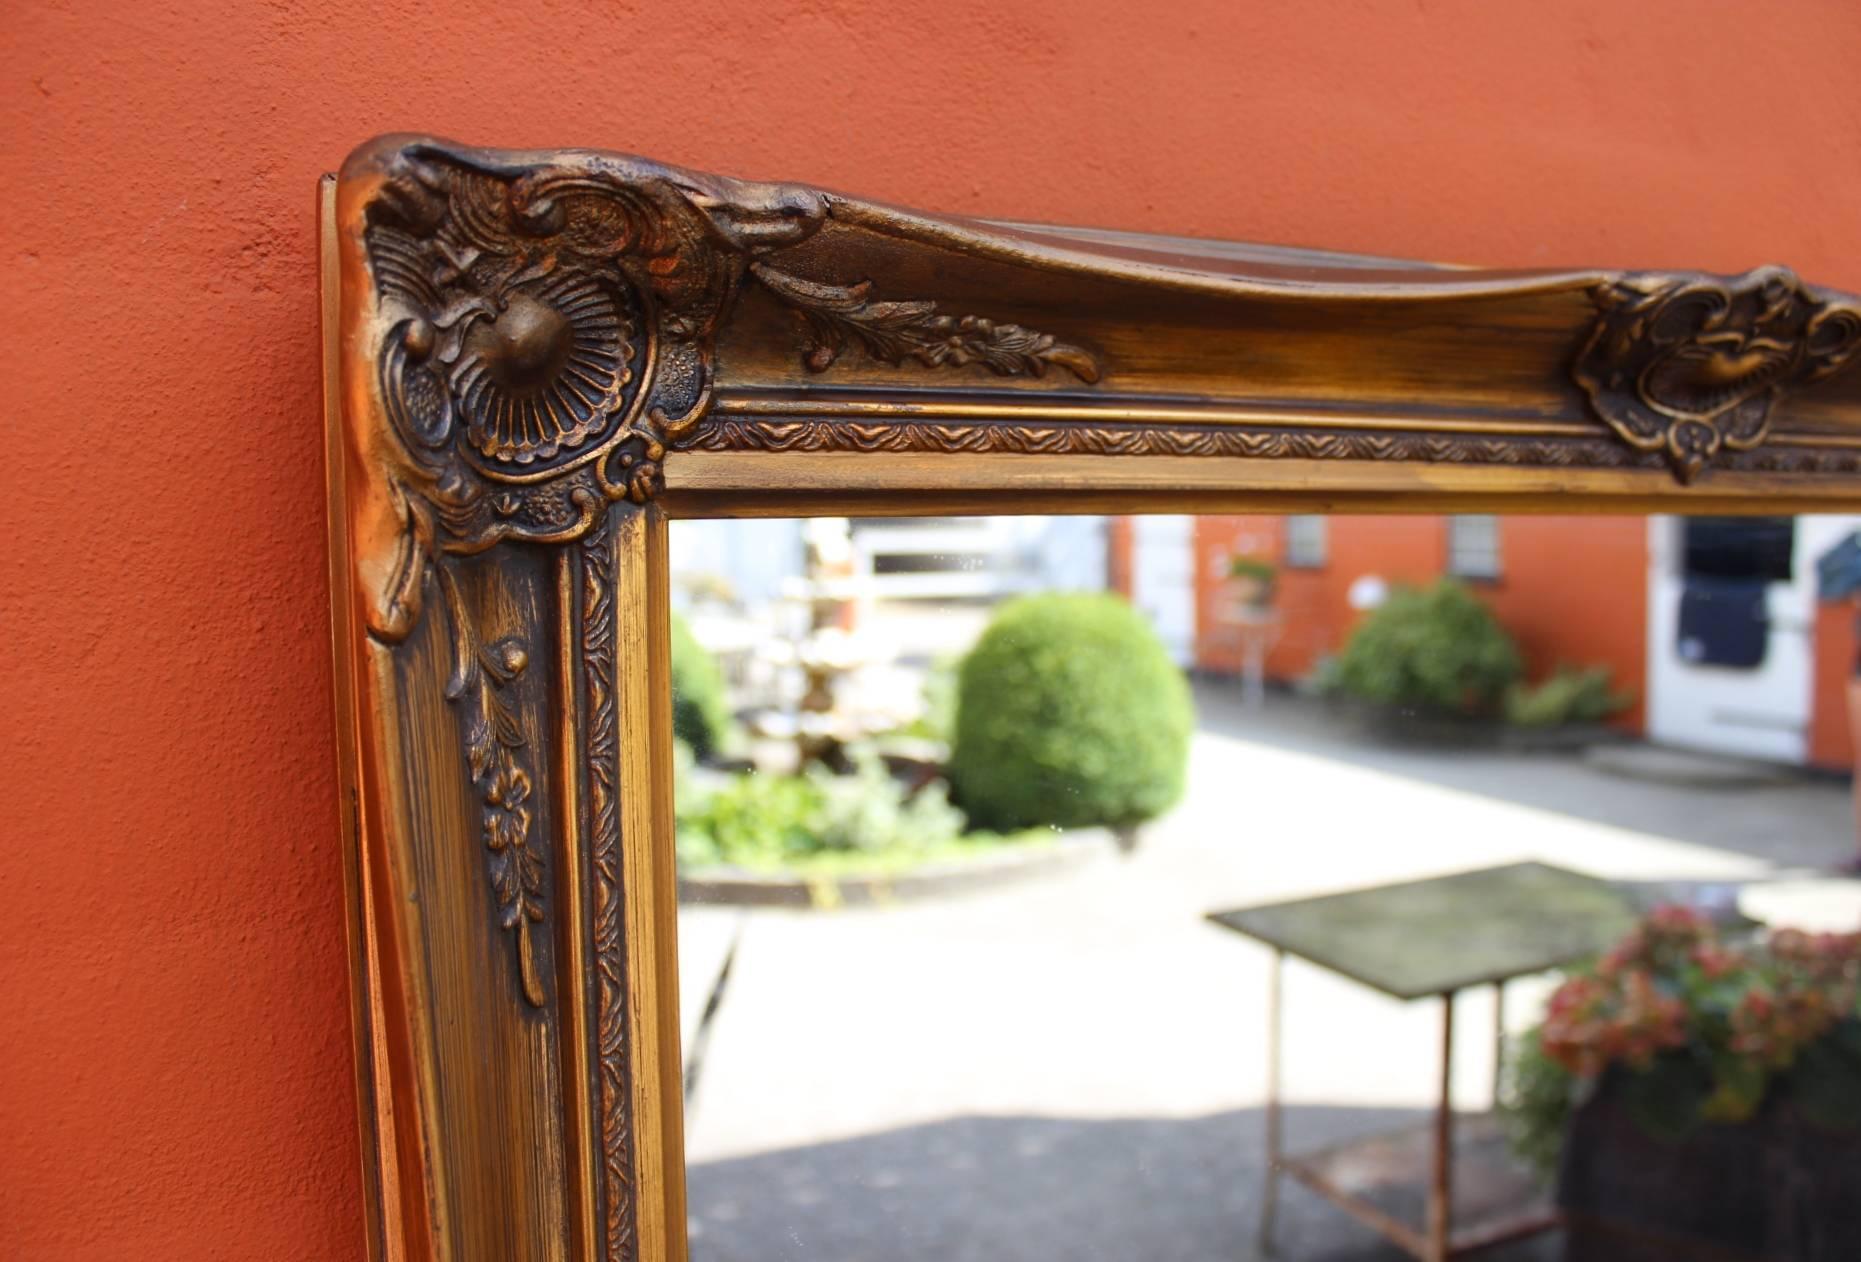 Danish Large Mirror with a Gilded Frame from Around the 1930s